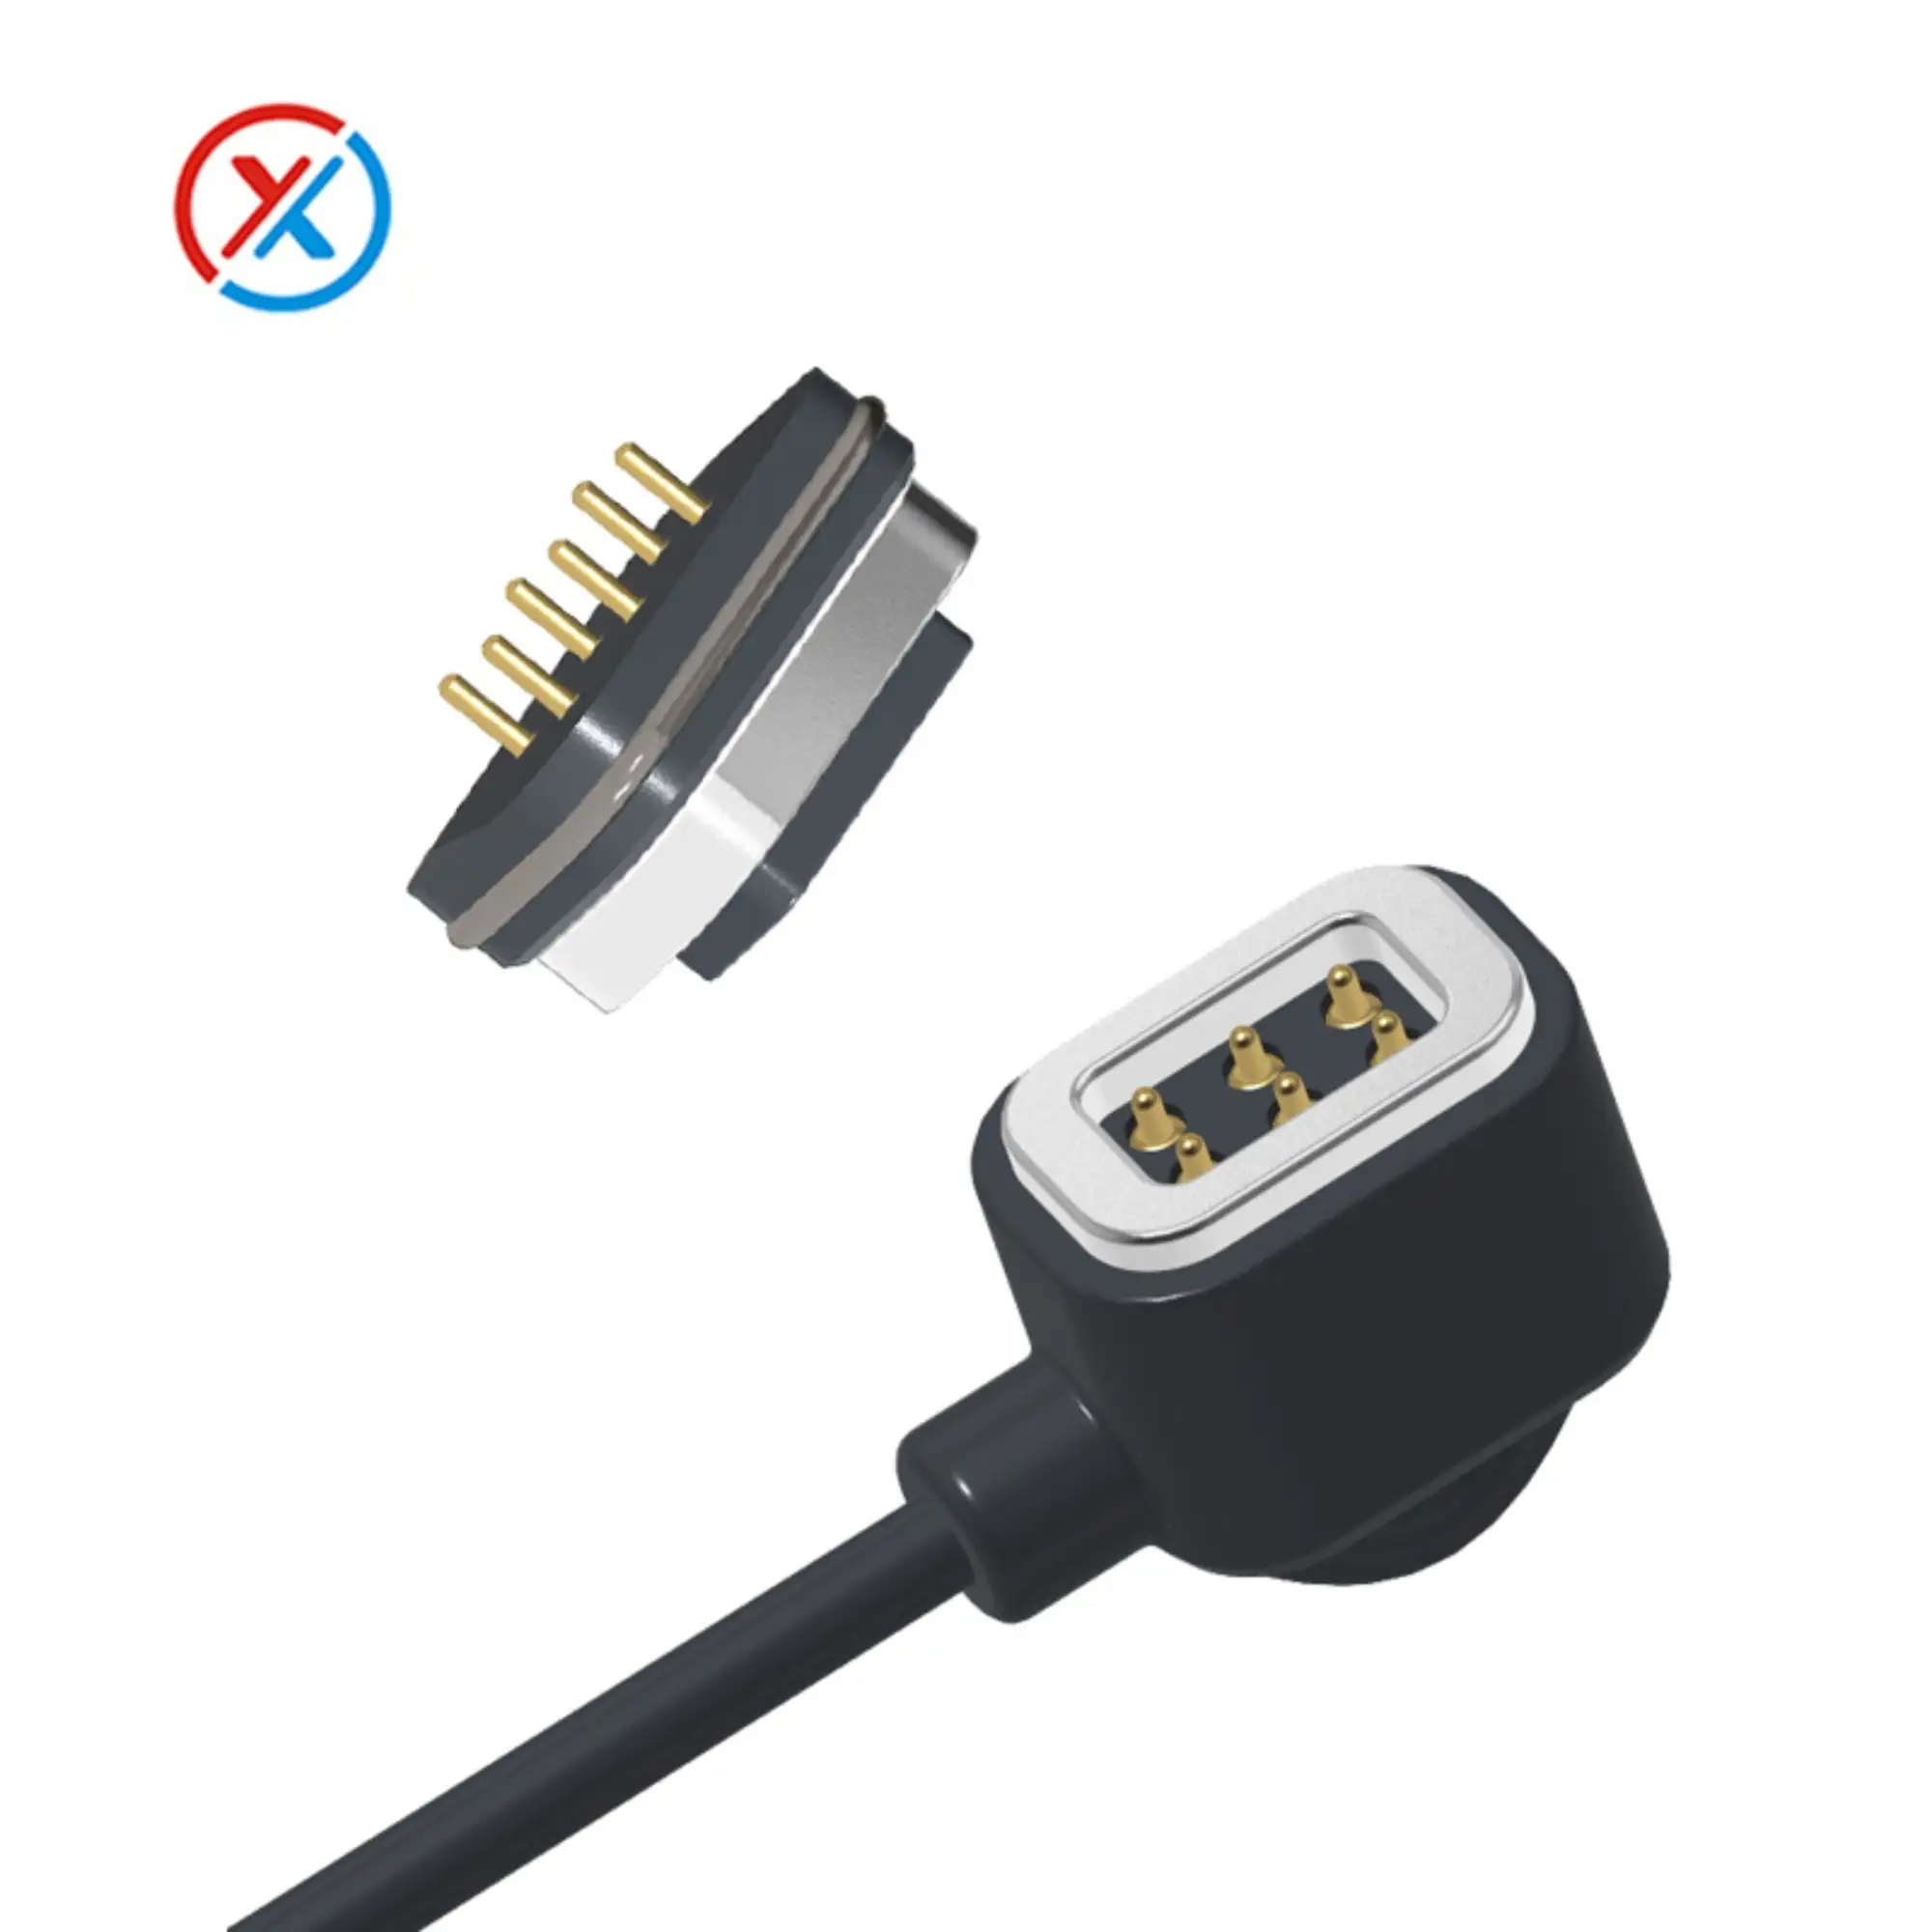 The Pros of Using a Metal Magnetic Data Cable for Charging Needs